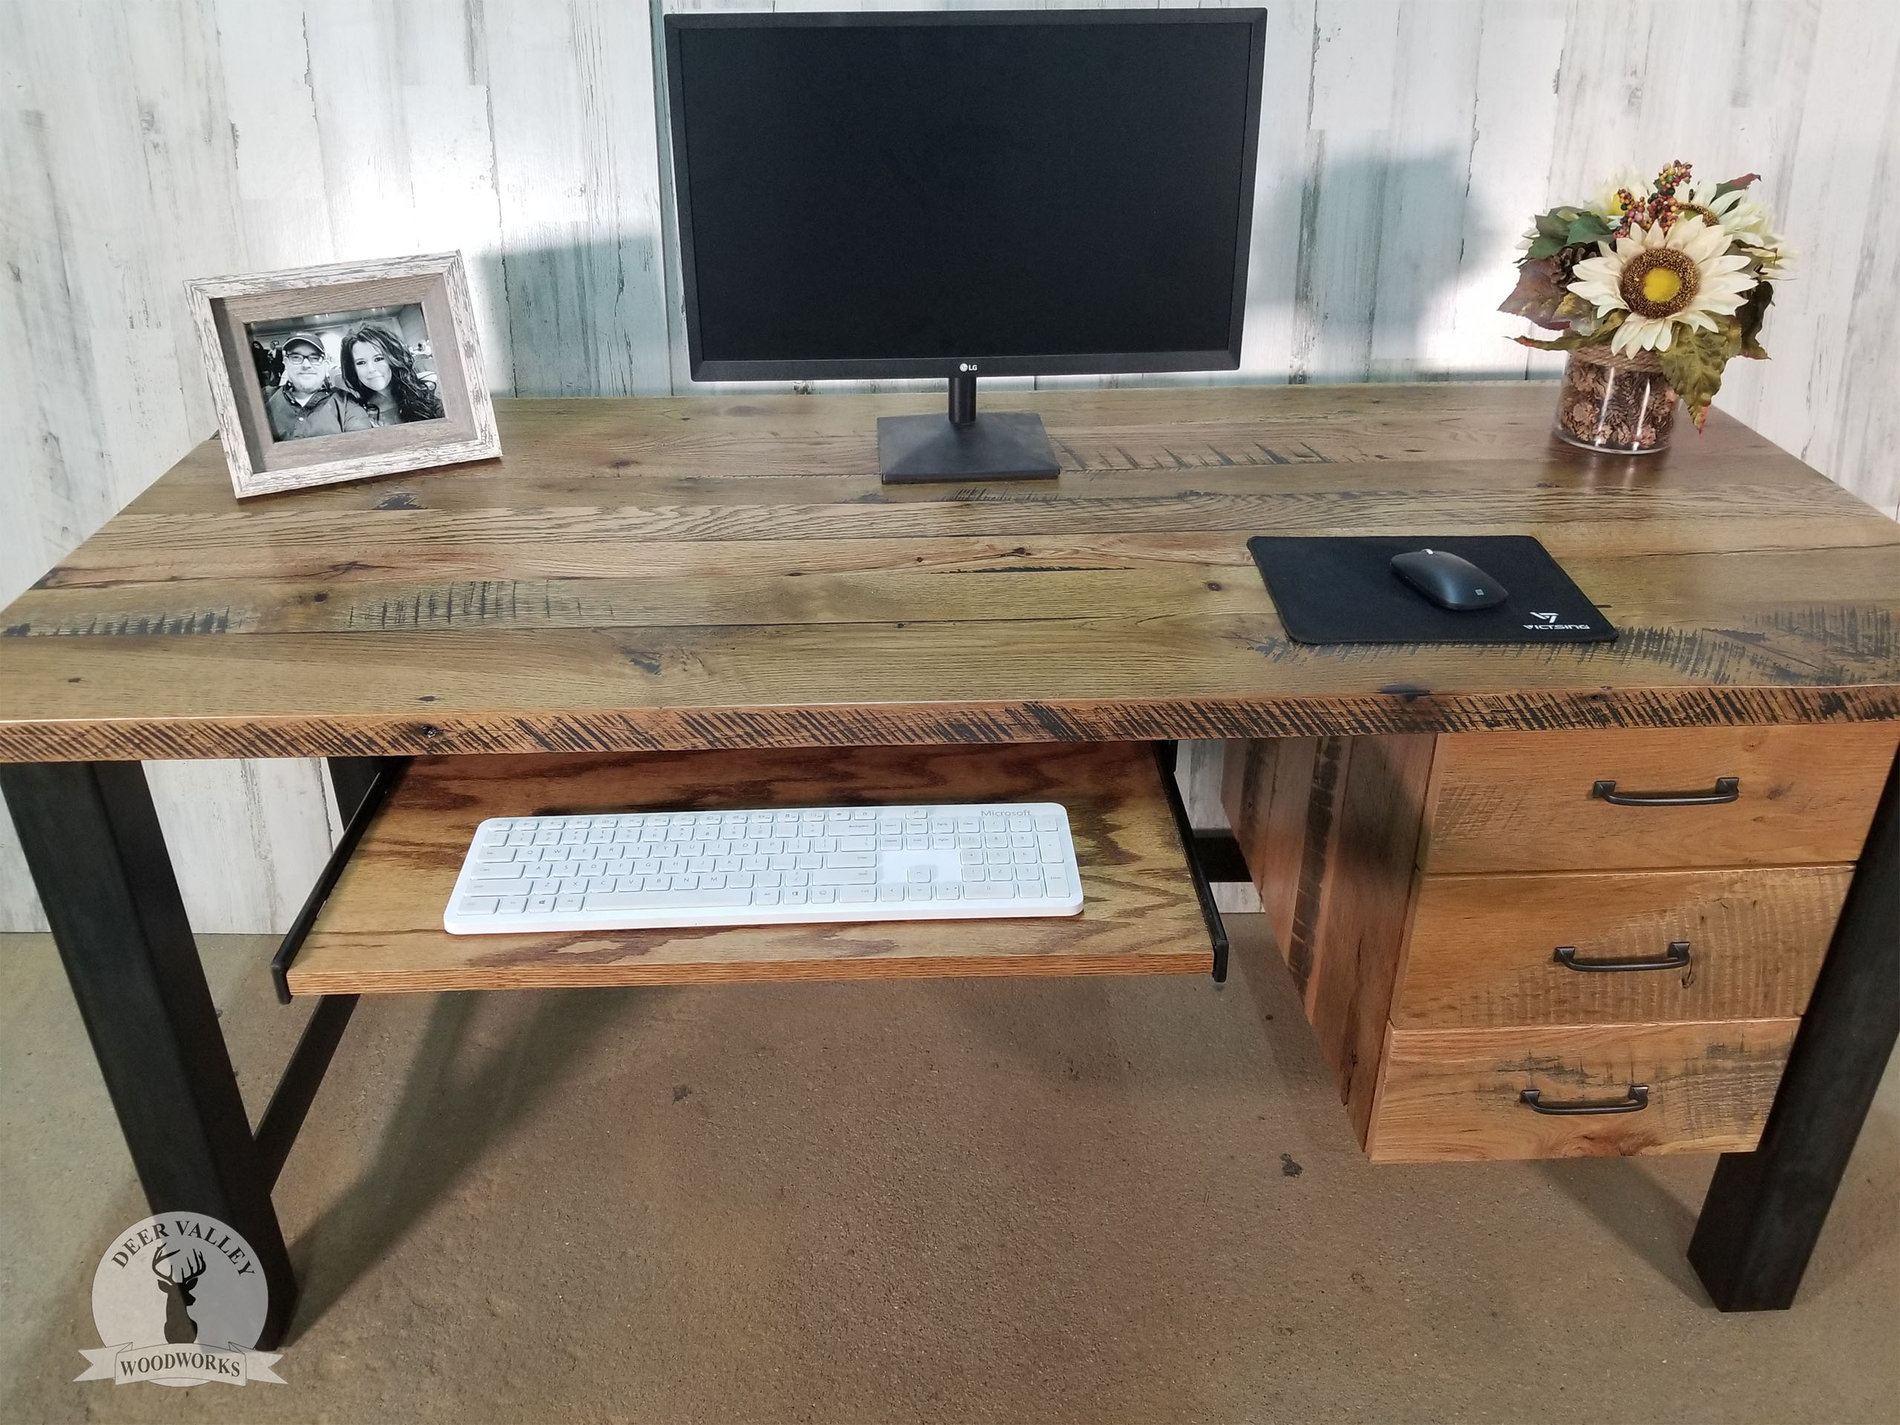 Rustic barnwood straight desk with a large desktop, pullout keyboard tray, three storage drawers, and an antiqued blackened welded steel frame.